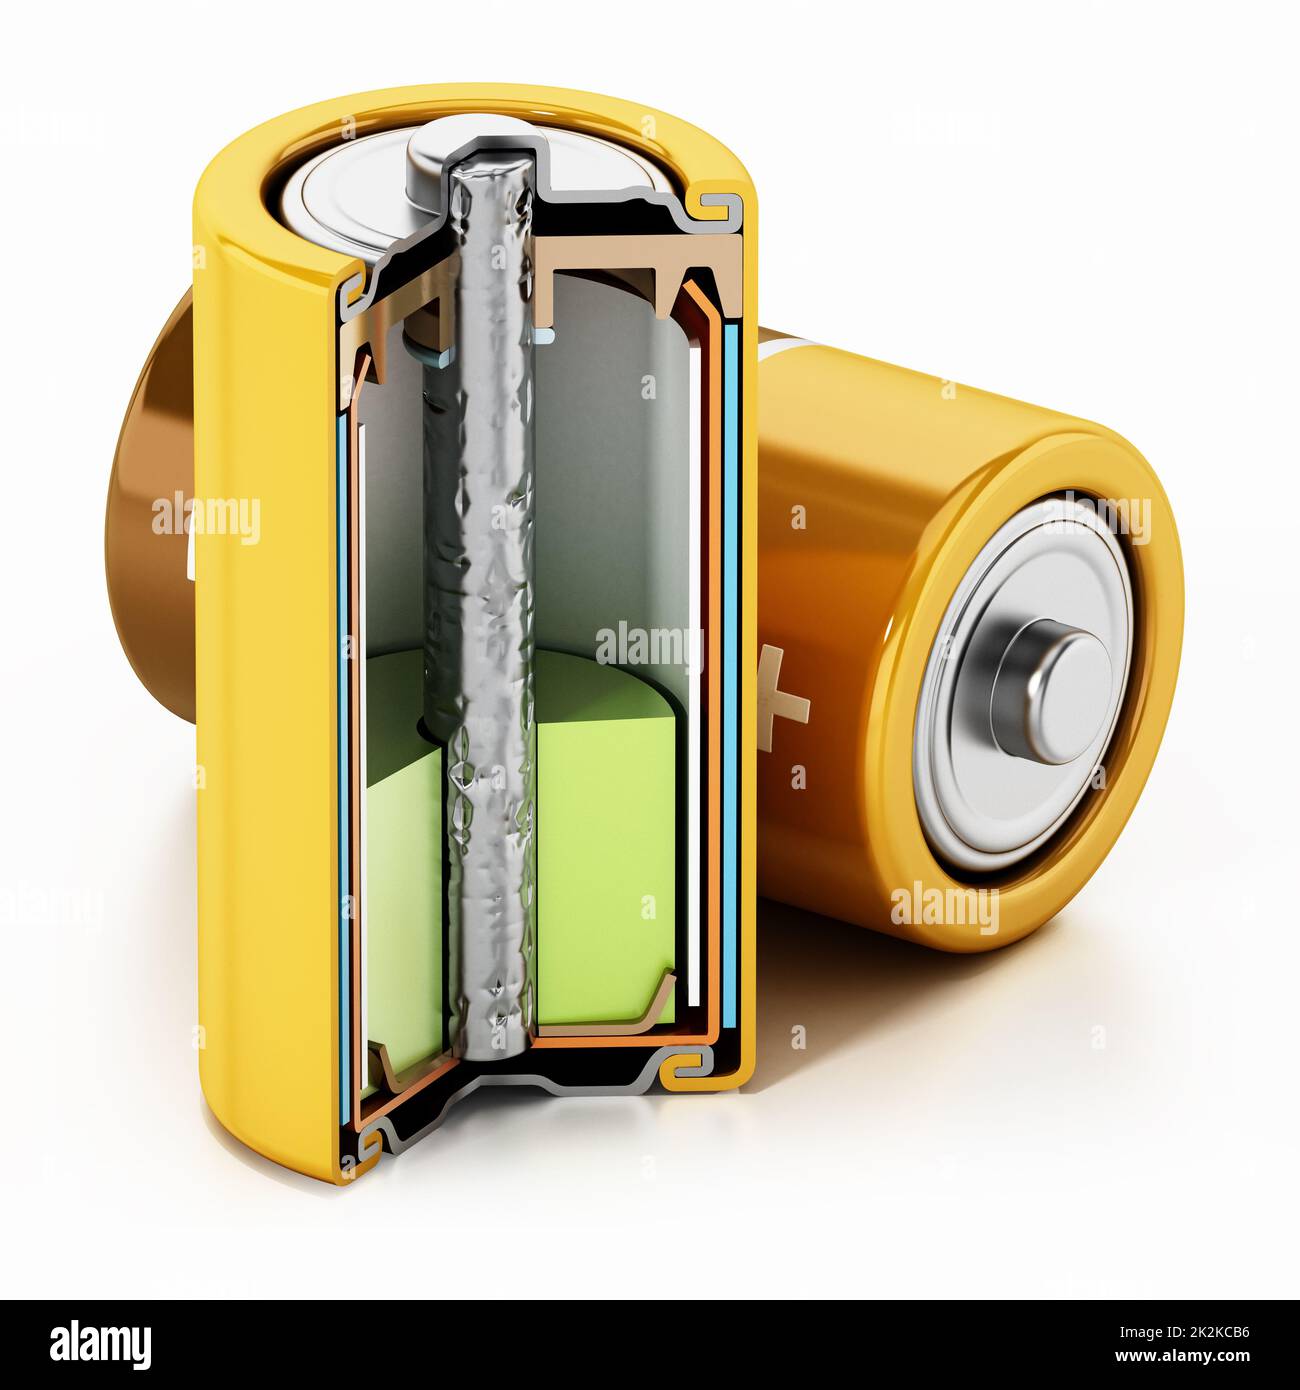 Image showing cross-section of an alcaline battery. 3D illustration Stock Photo